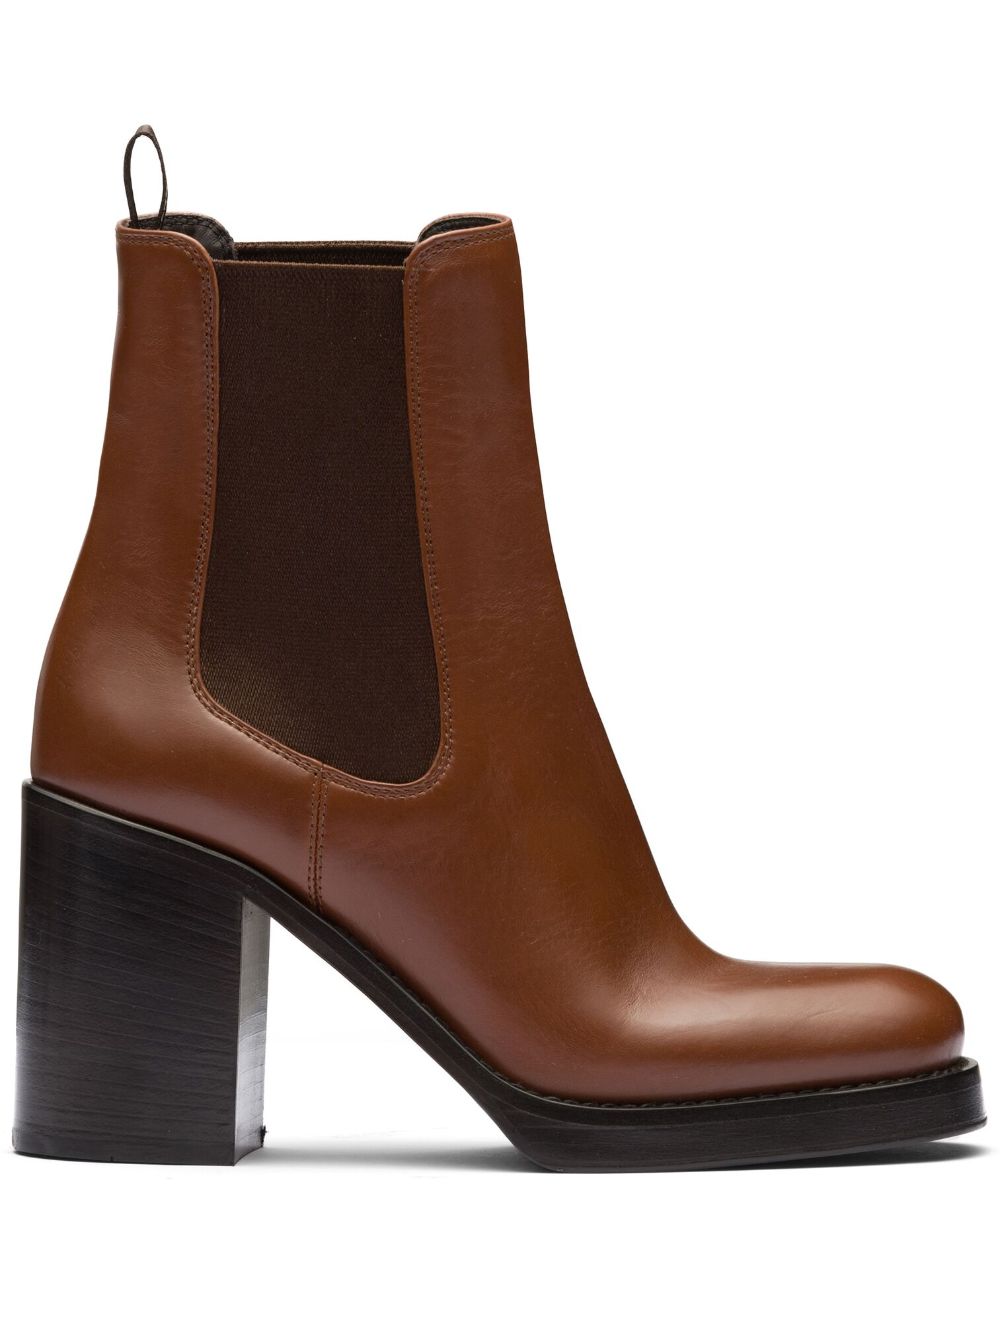 Prada brushed leather 85mm ankle boots - Brown